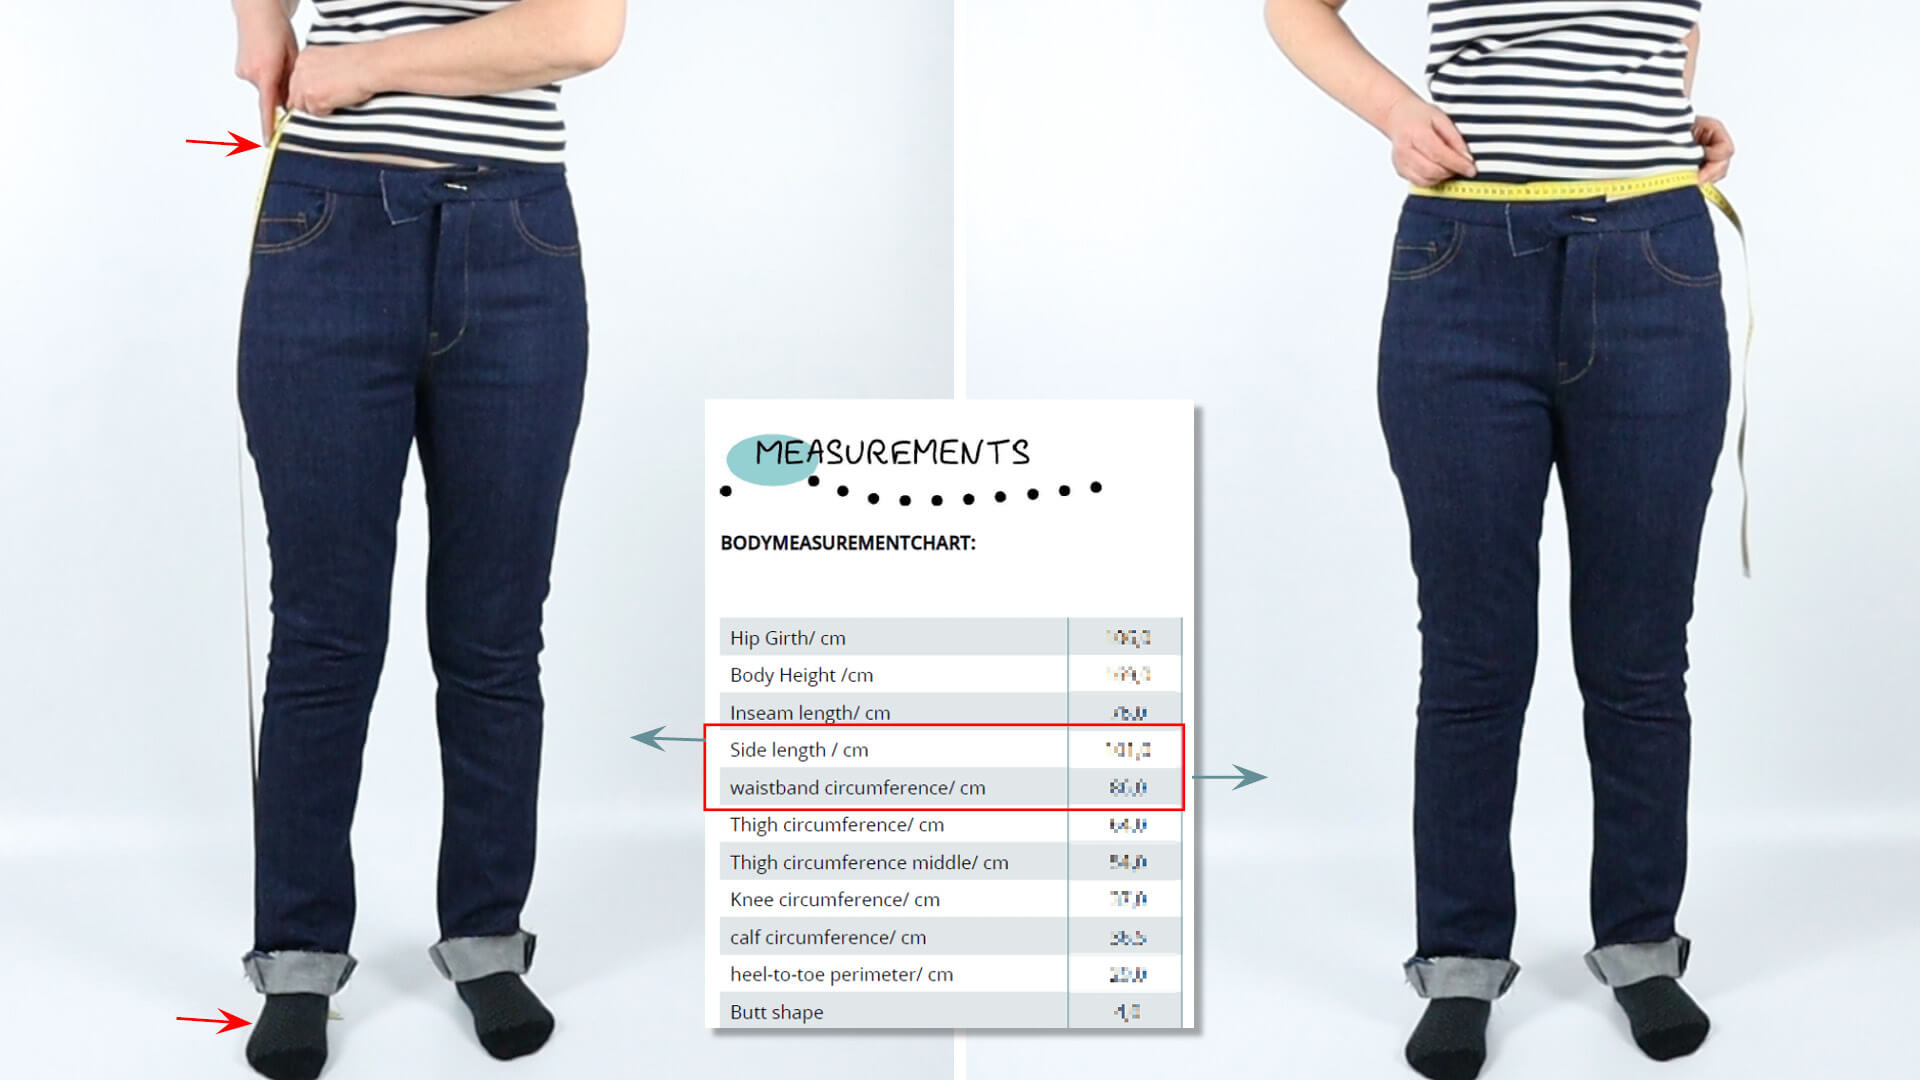 The waistband height and circumference are checked on the trousers being tried on